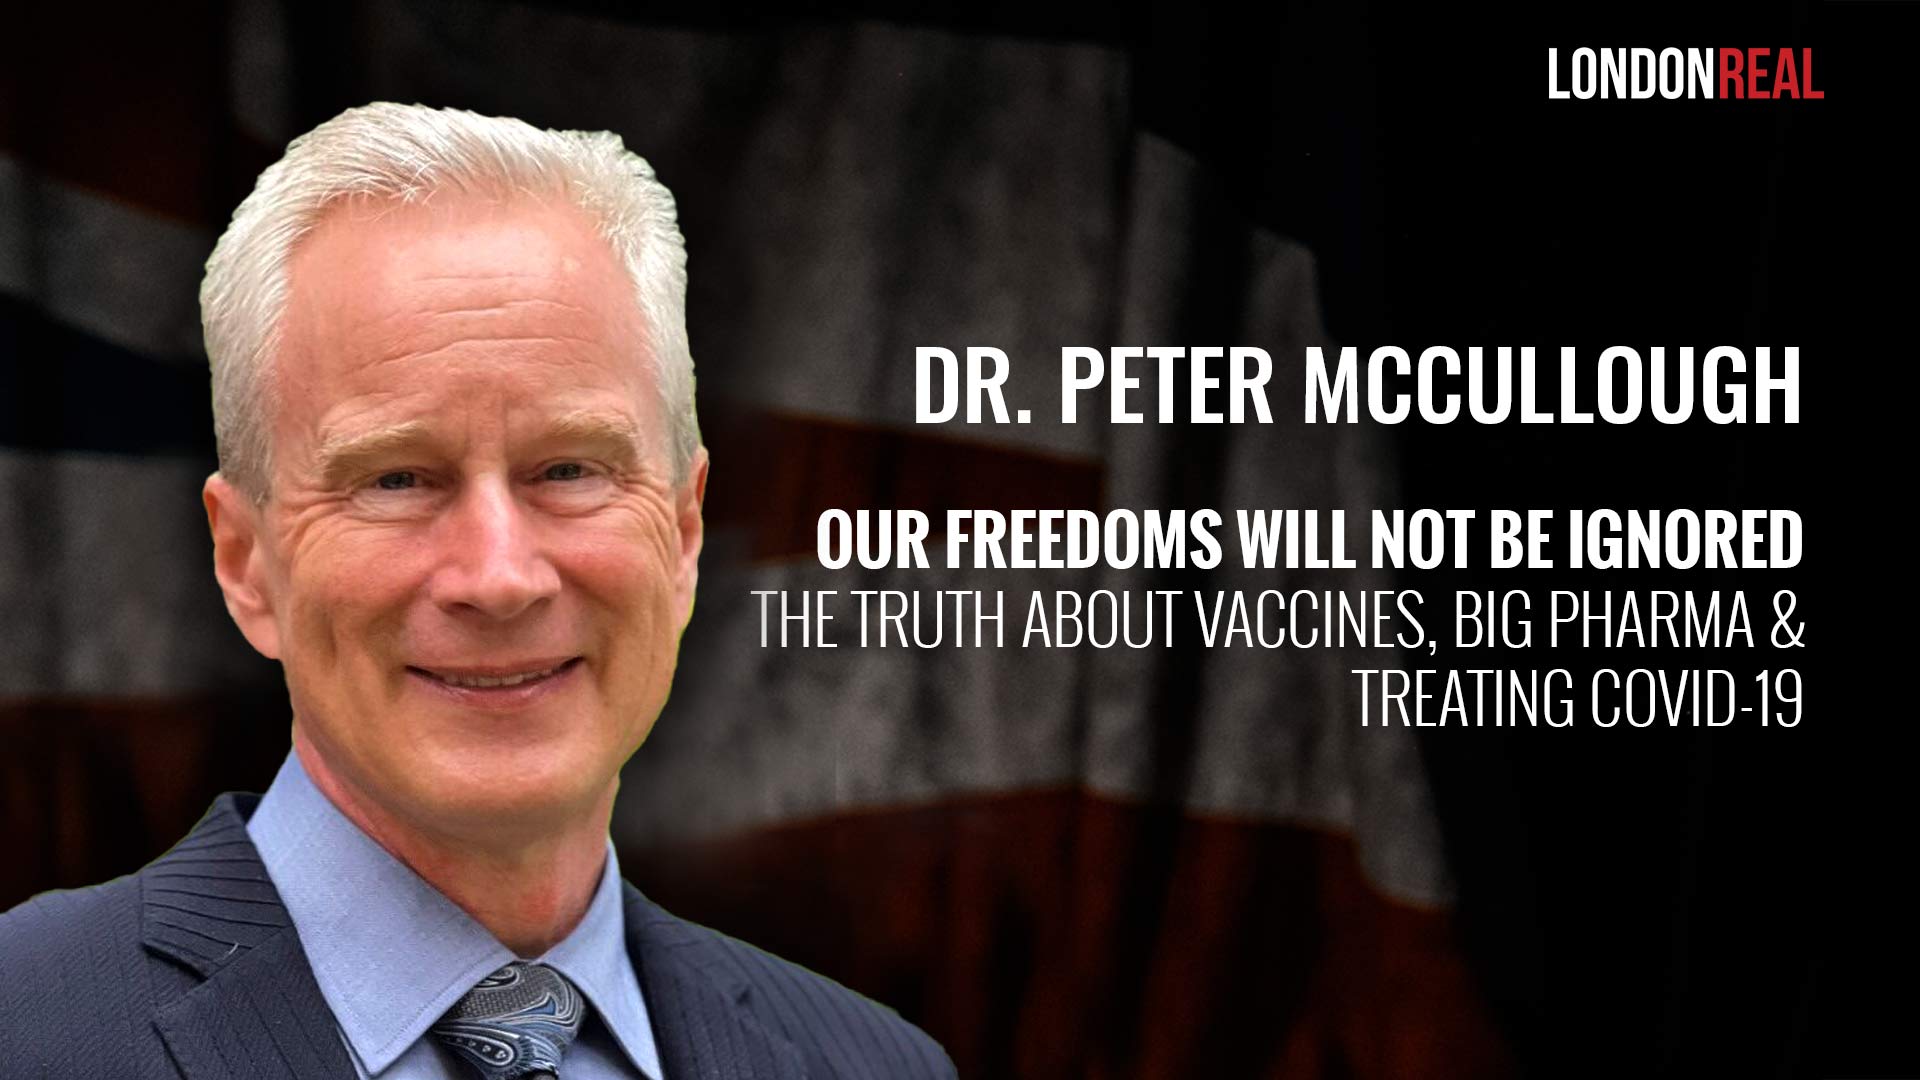 Dr Peter McCullough - Our Freedoms Will Not Be Ignored: The Truth About Vaccines, Big Pharma & Treating Covid-19